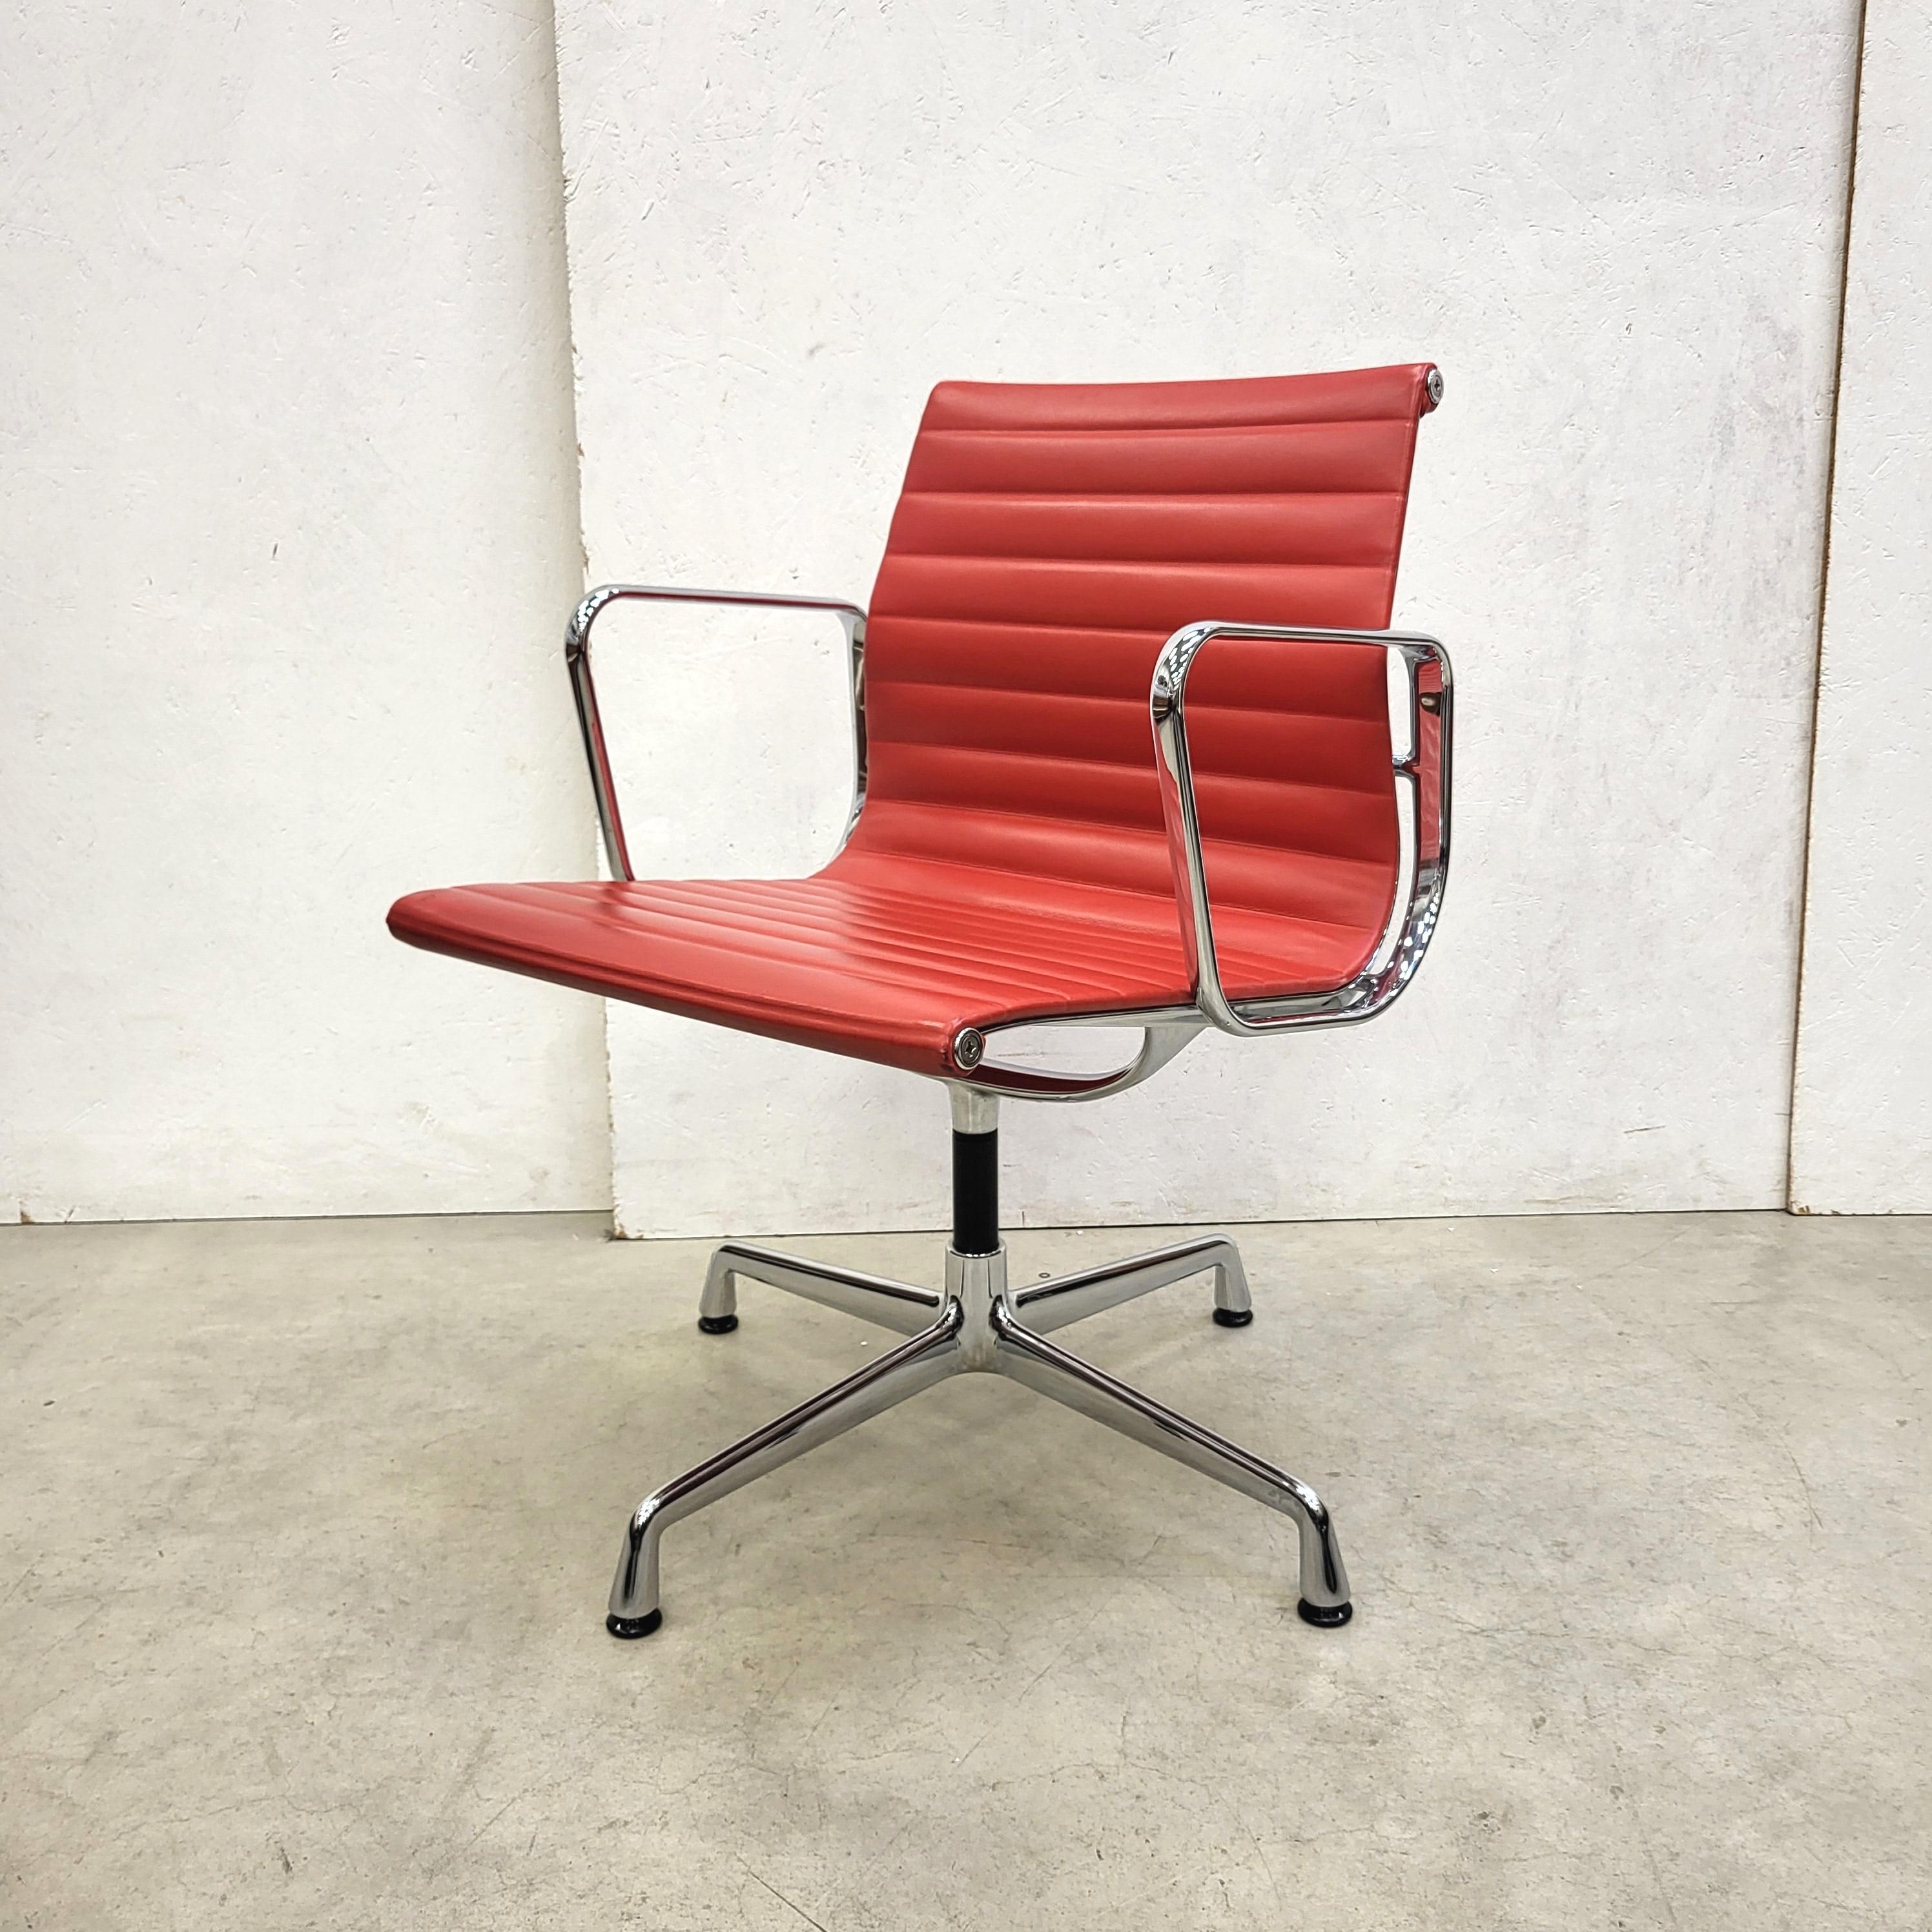 Rare set of 4 red leather chairs model EA108 produced by Vitra and designed by Charles Eames. 
The chairs features a chromed aluminium frame and are all made in 2013.

The set is perfect useable in a dining or conference room.

The chairs are in an